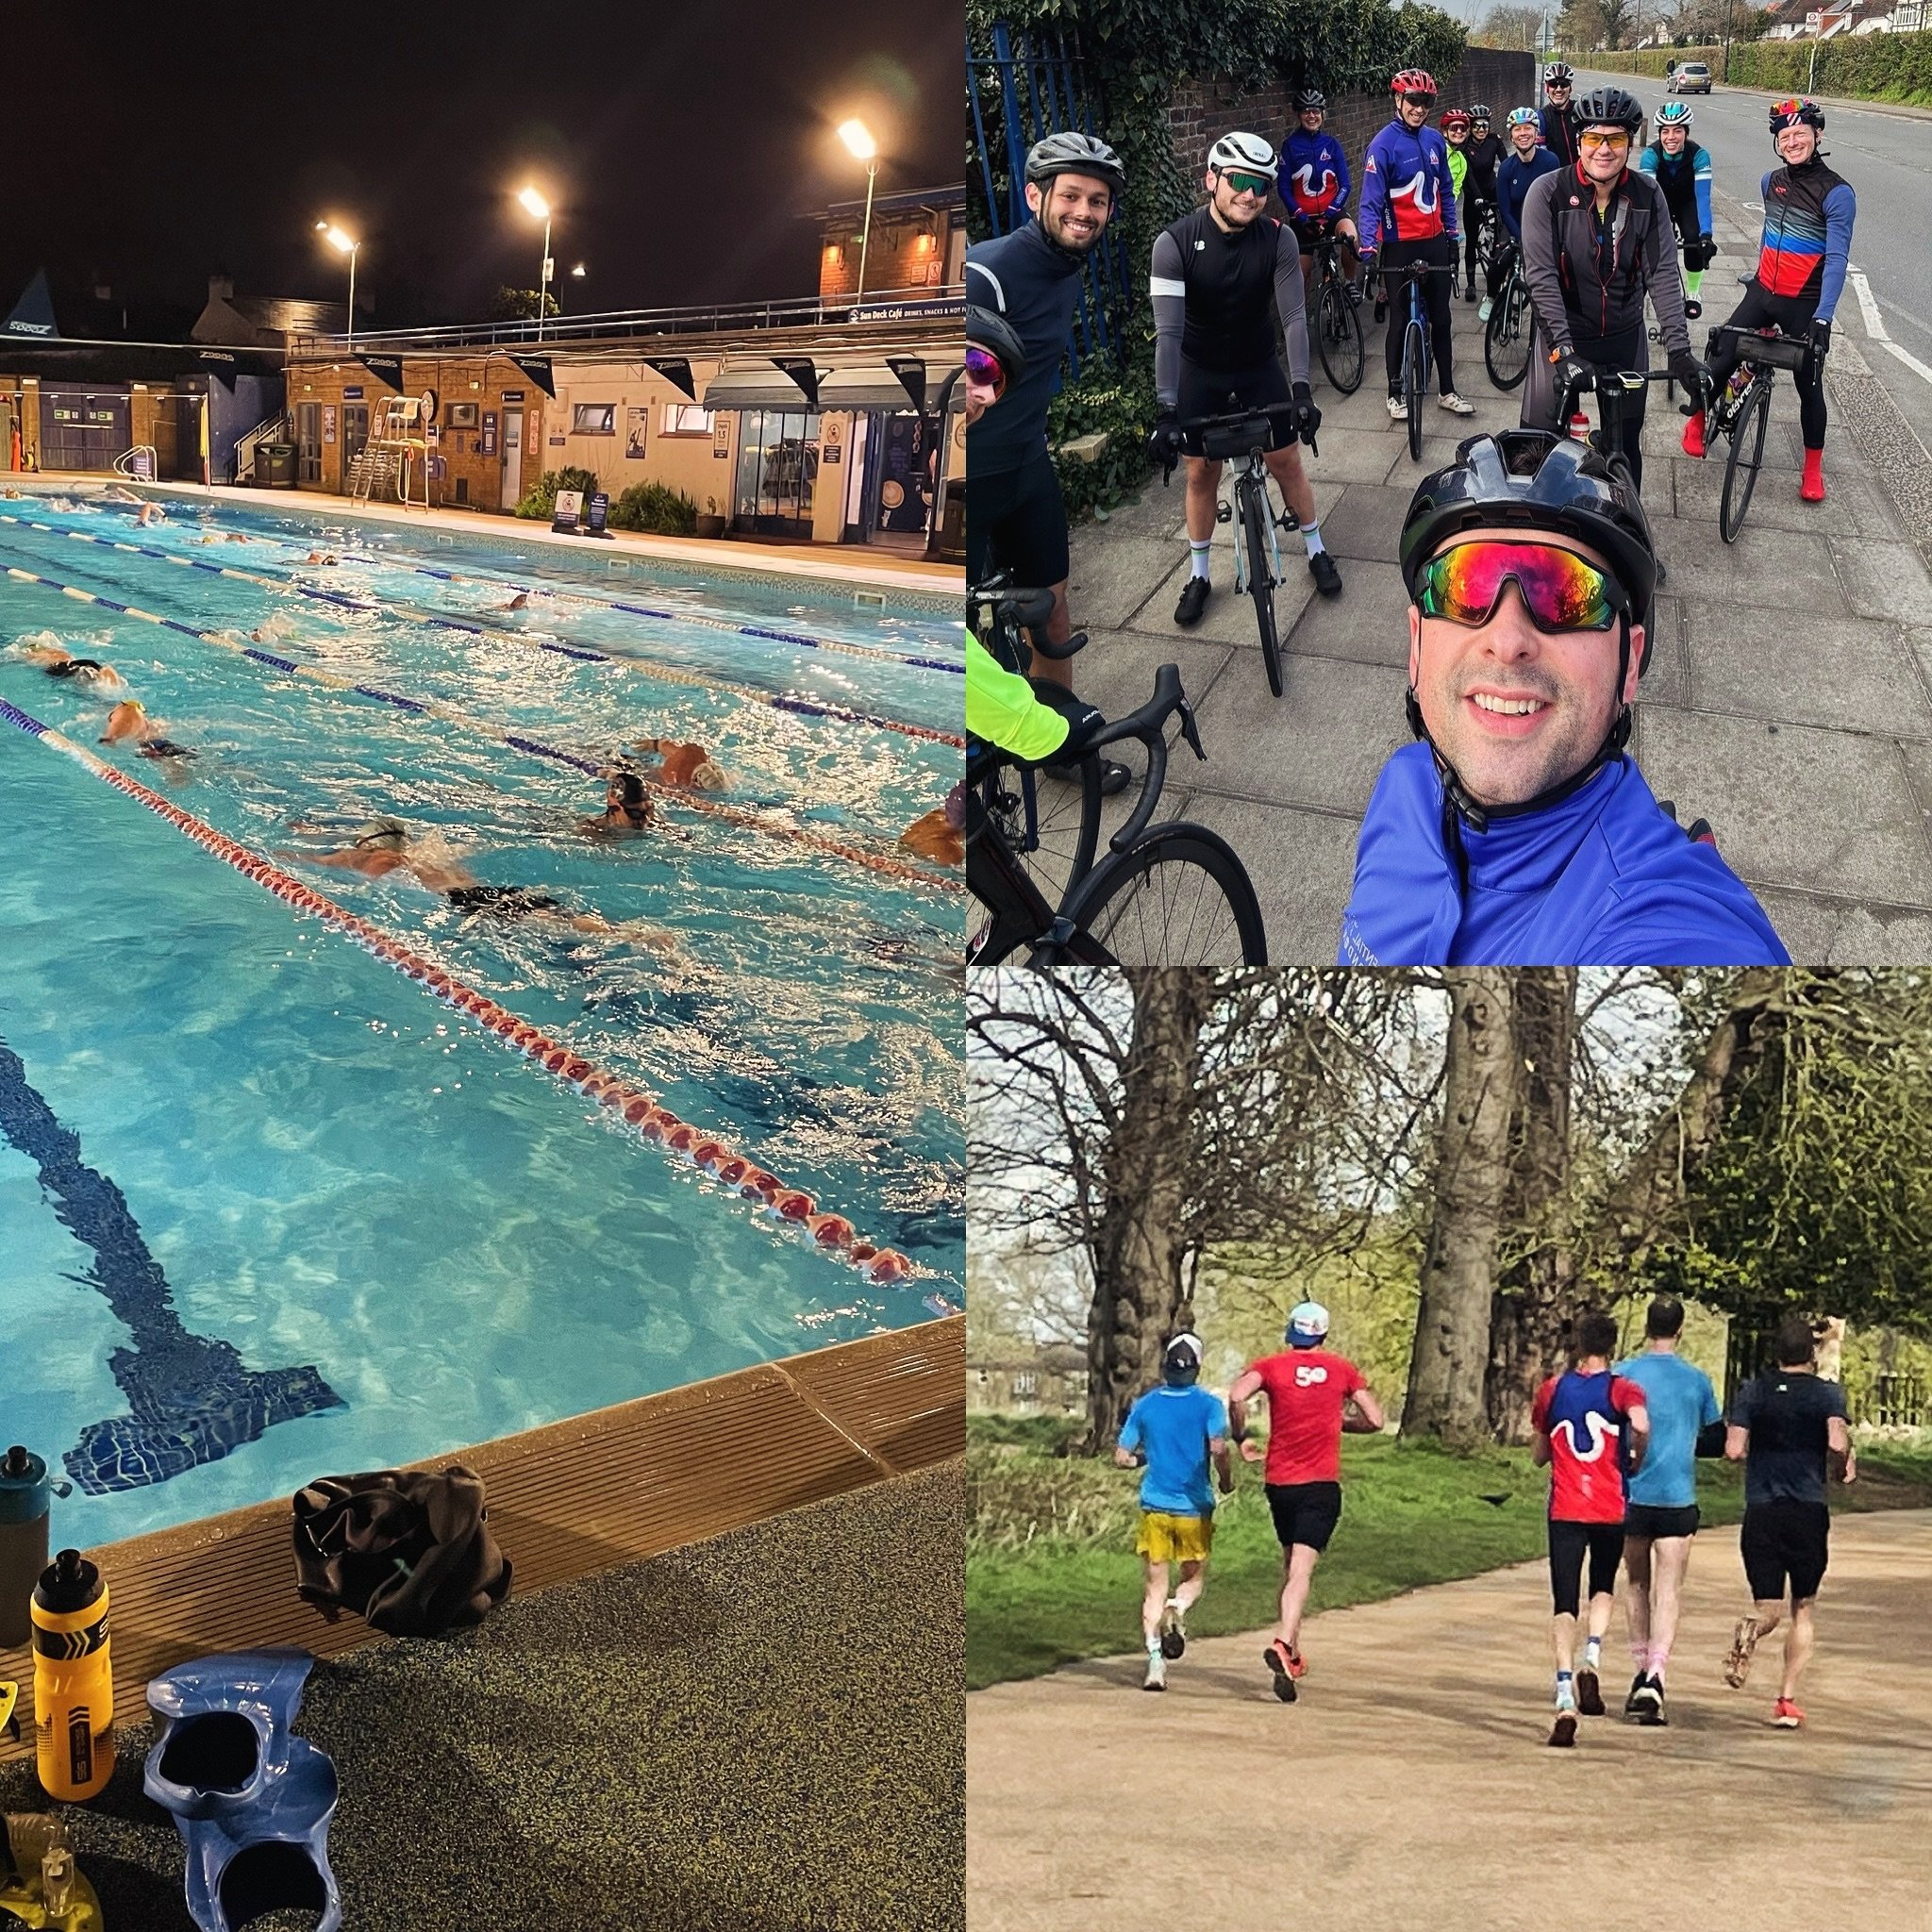 Swim | Bike | Run
&mdash;&mdash;&mdash;&mdash;&mdash;&mdash;&mdash;&mdash;&mdash;&mdash;
Is summer here, finally 🤞🏻
Perhaps a summer triathlon is planned and you want some company?
Thames Turbo Triathlon Club is a small club based in Hampton, West 